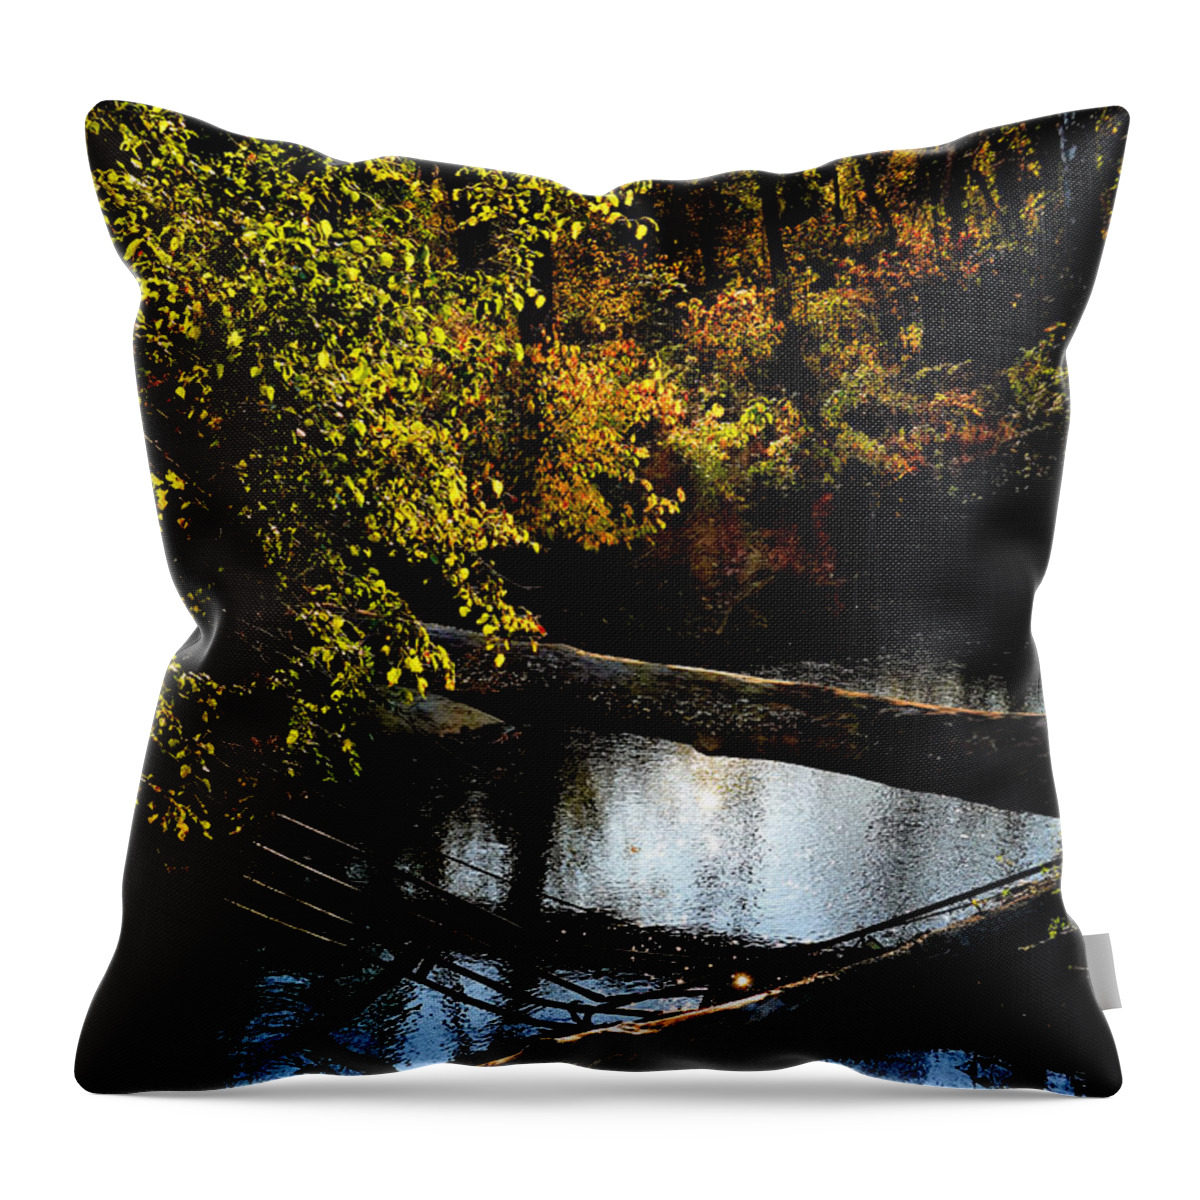 Tranquil Throw Pillow featuring the photograph Broad Run Autumn No. 1 by Steve Ember